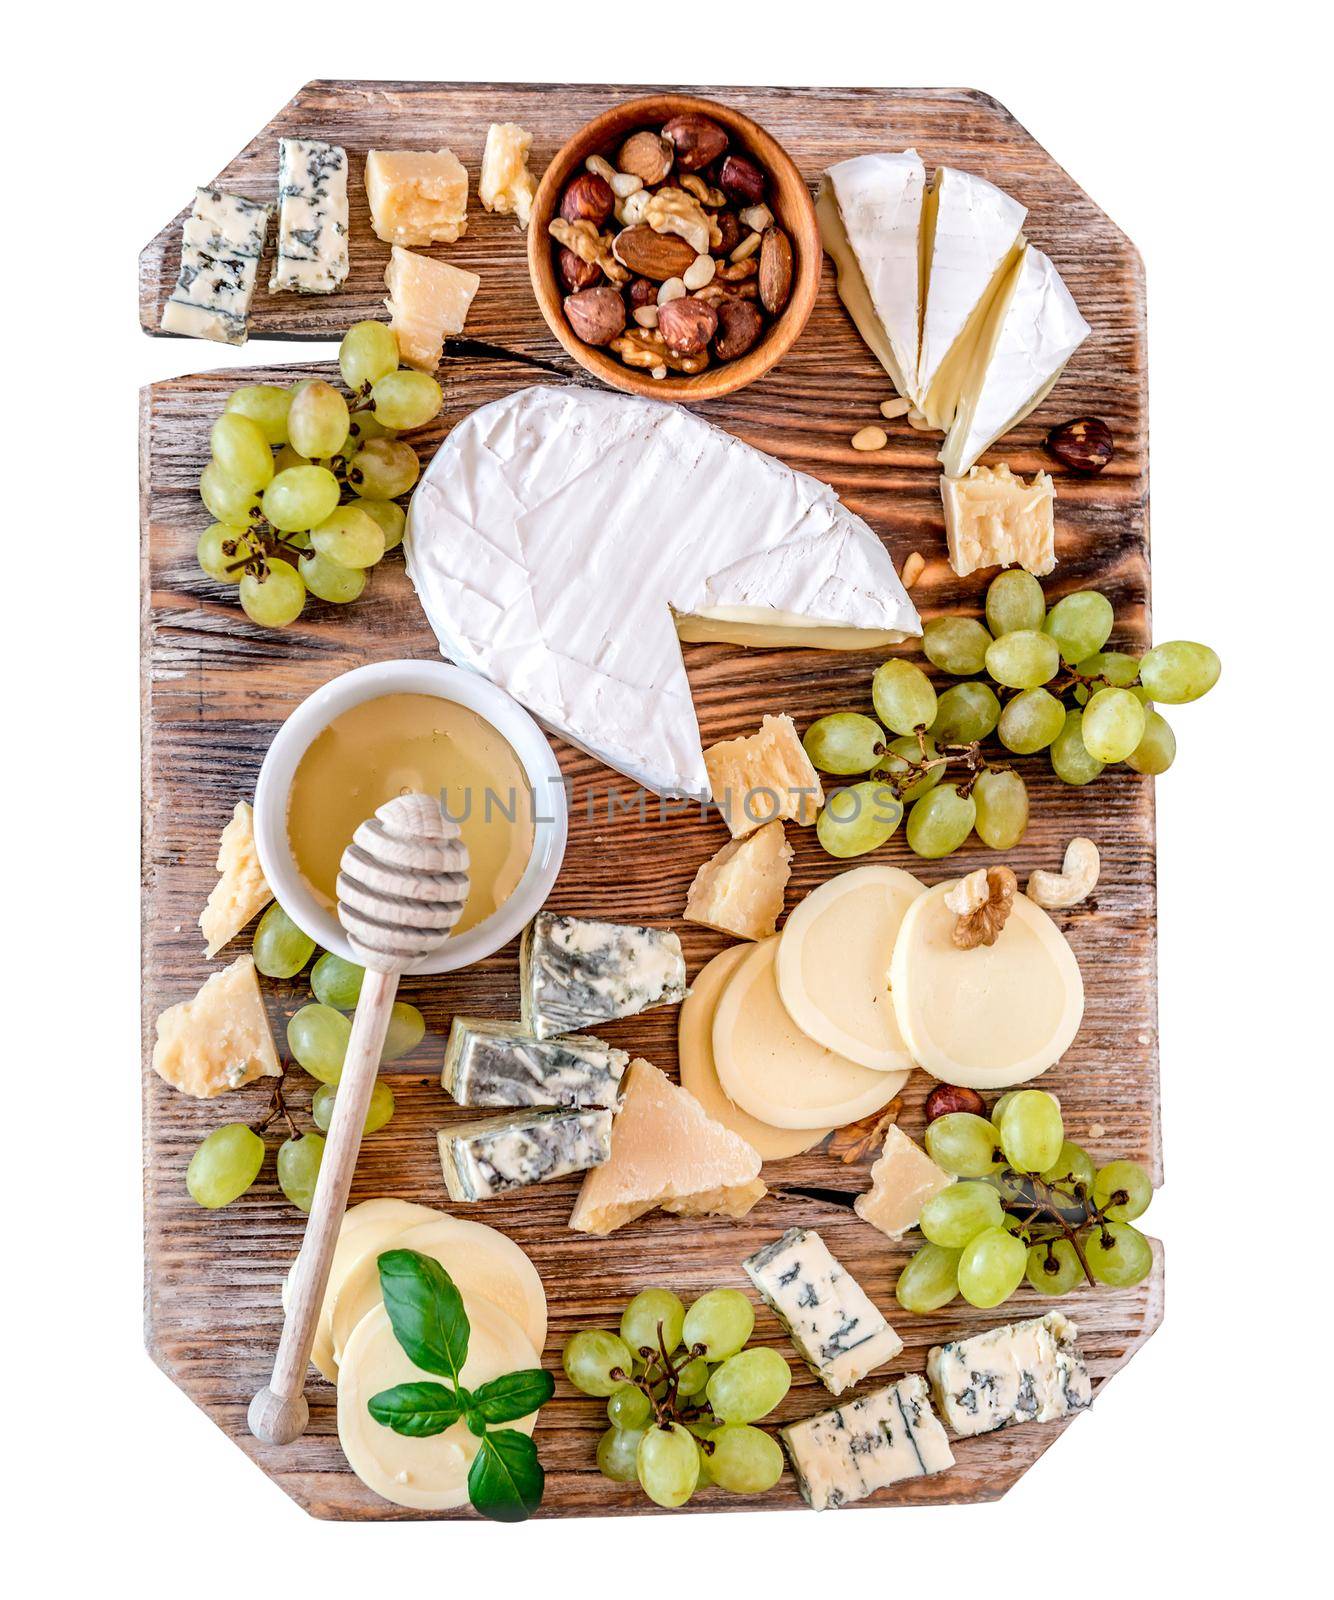 Cheese plate served with nuts and honey by tan4ikk1